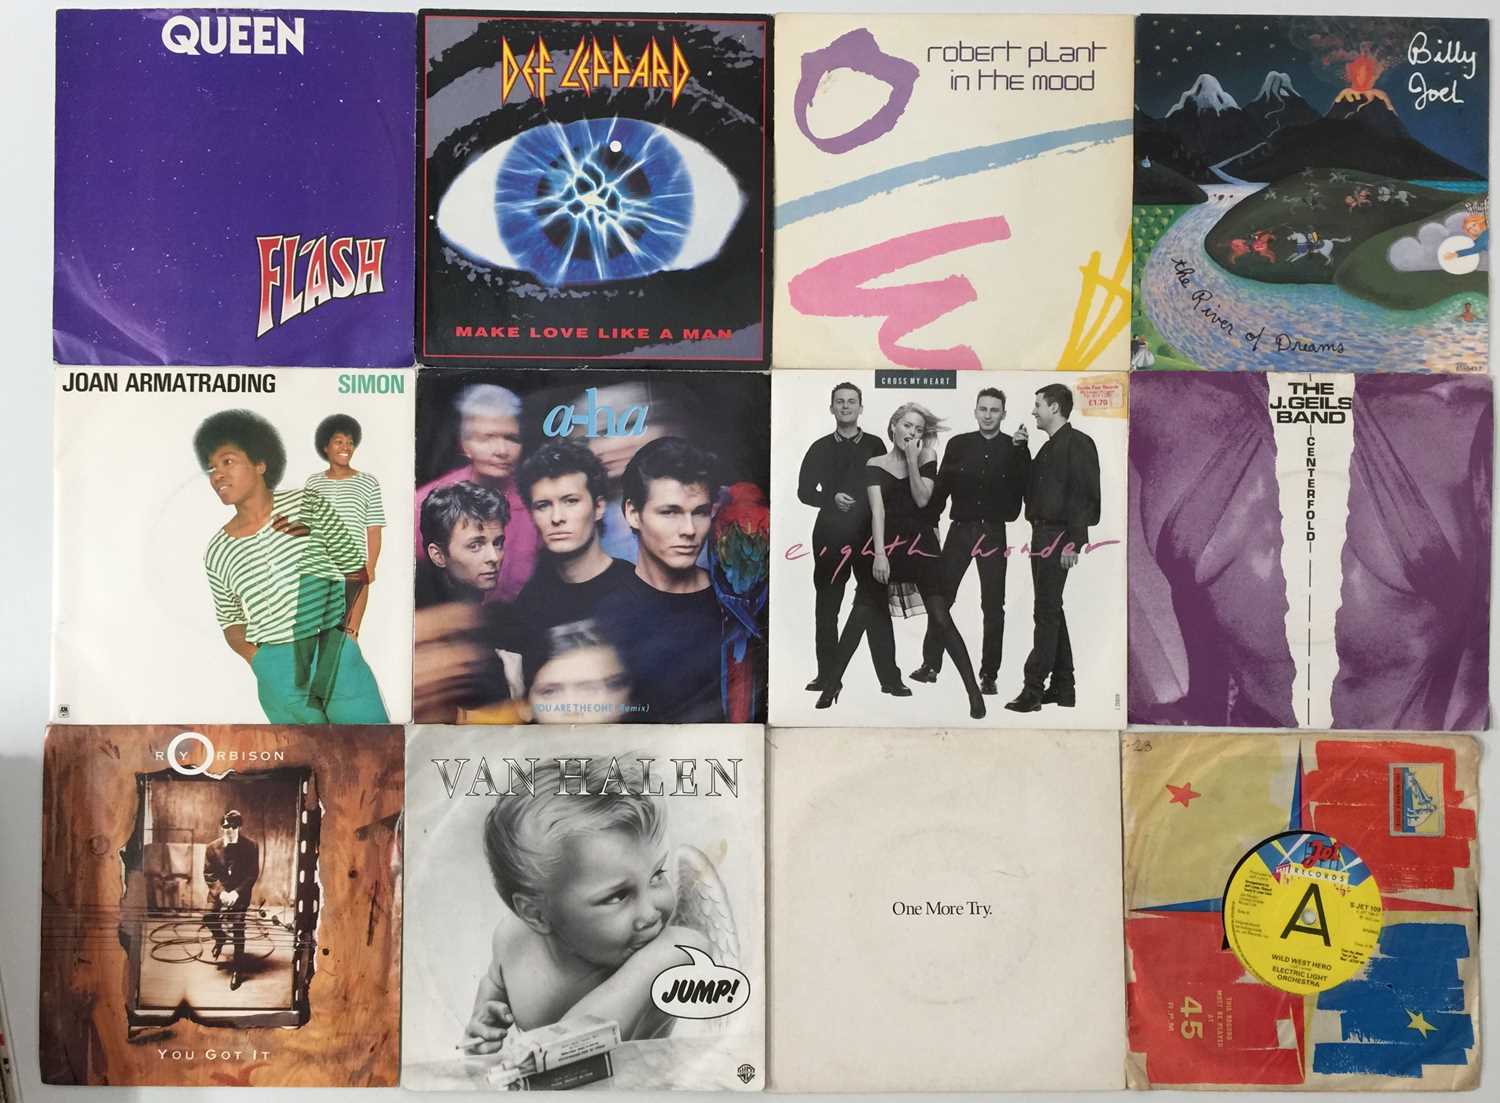 70's / 80's / 90's POP & ROCK - 7" COLLECTION